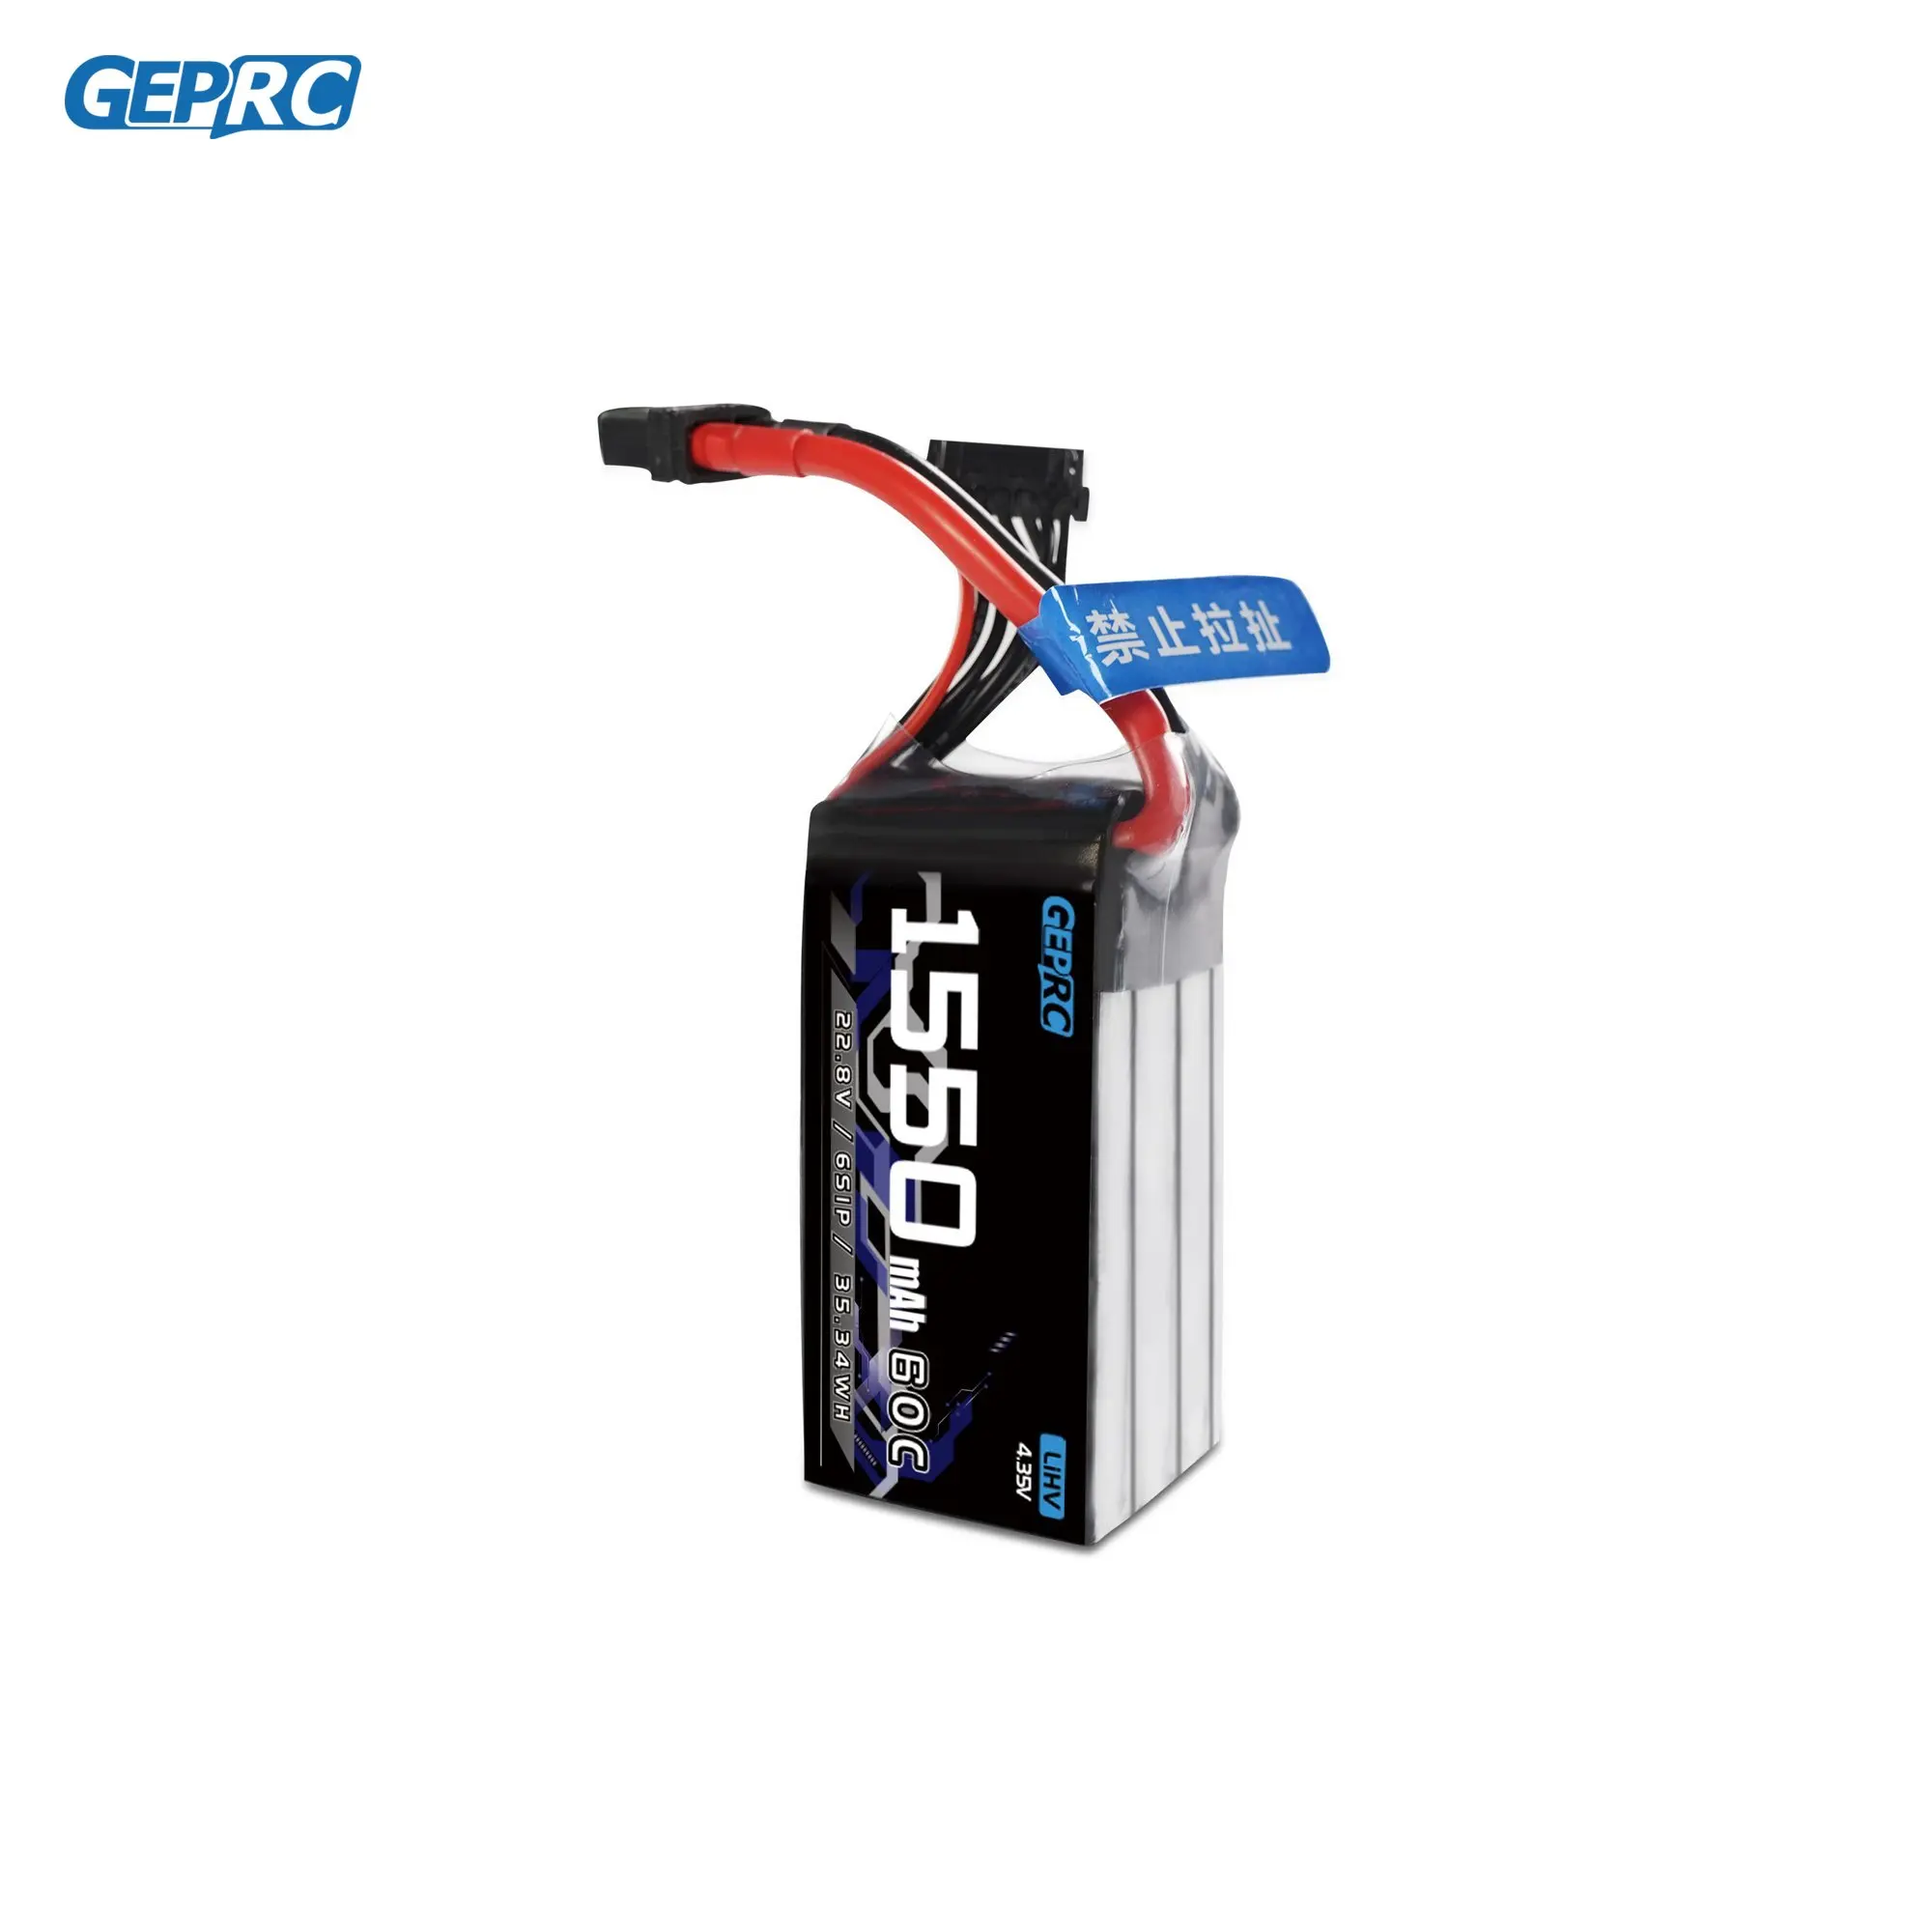 

GEPRC 6S 1550mAh 60C Battery Suitable For 3-5Inch Series Drone For RC FPV Quadcopter Freestyle Series Drone Accessories Parts